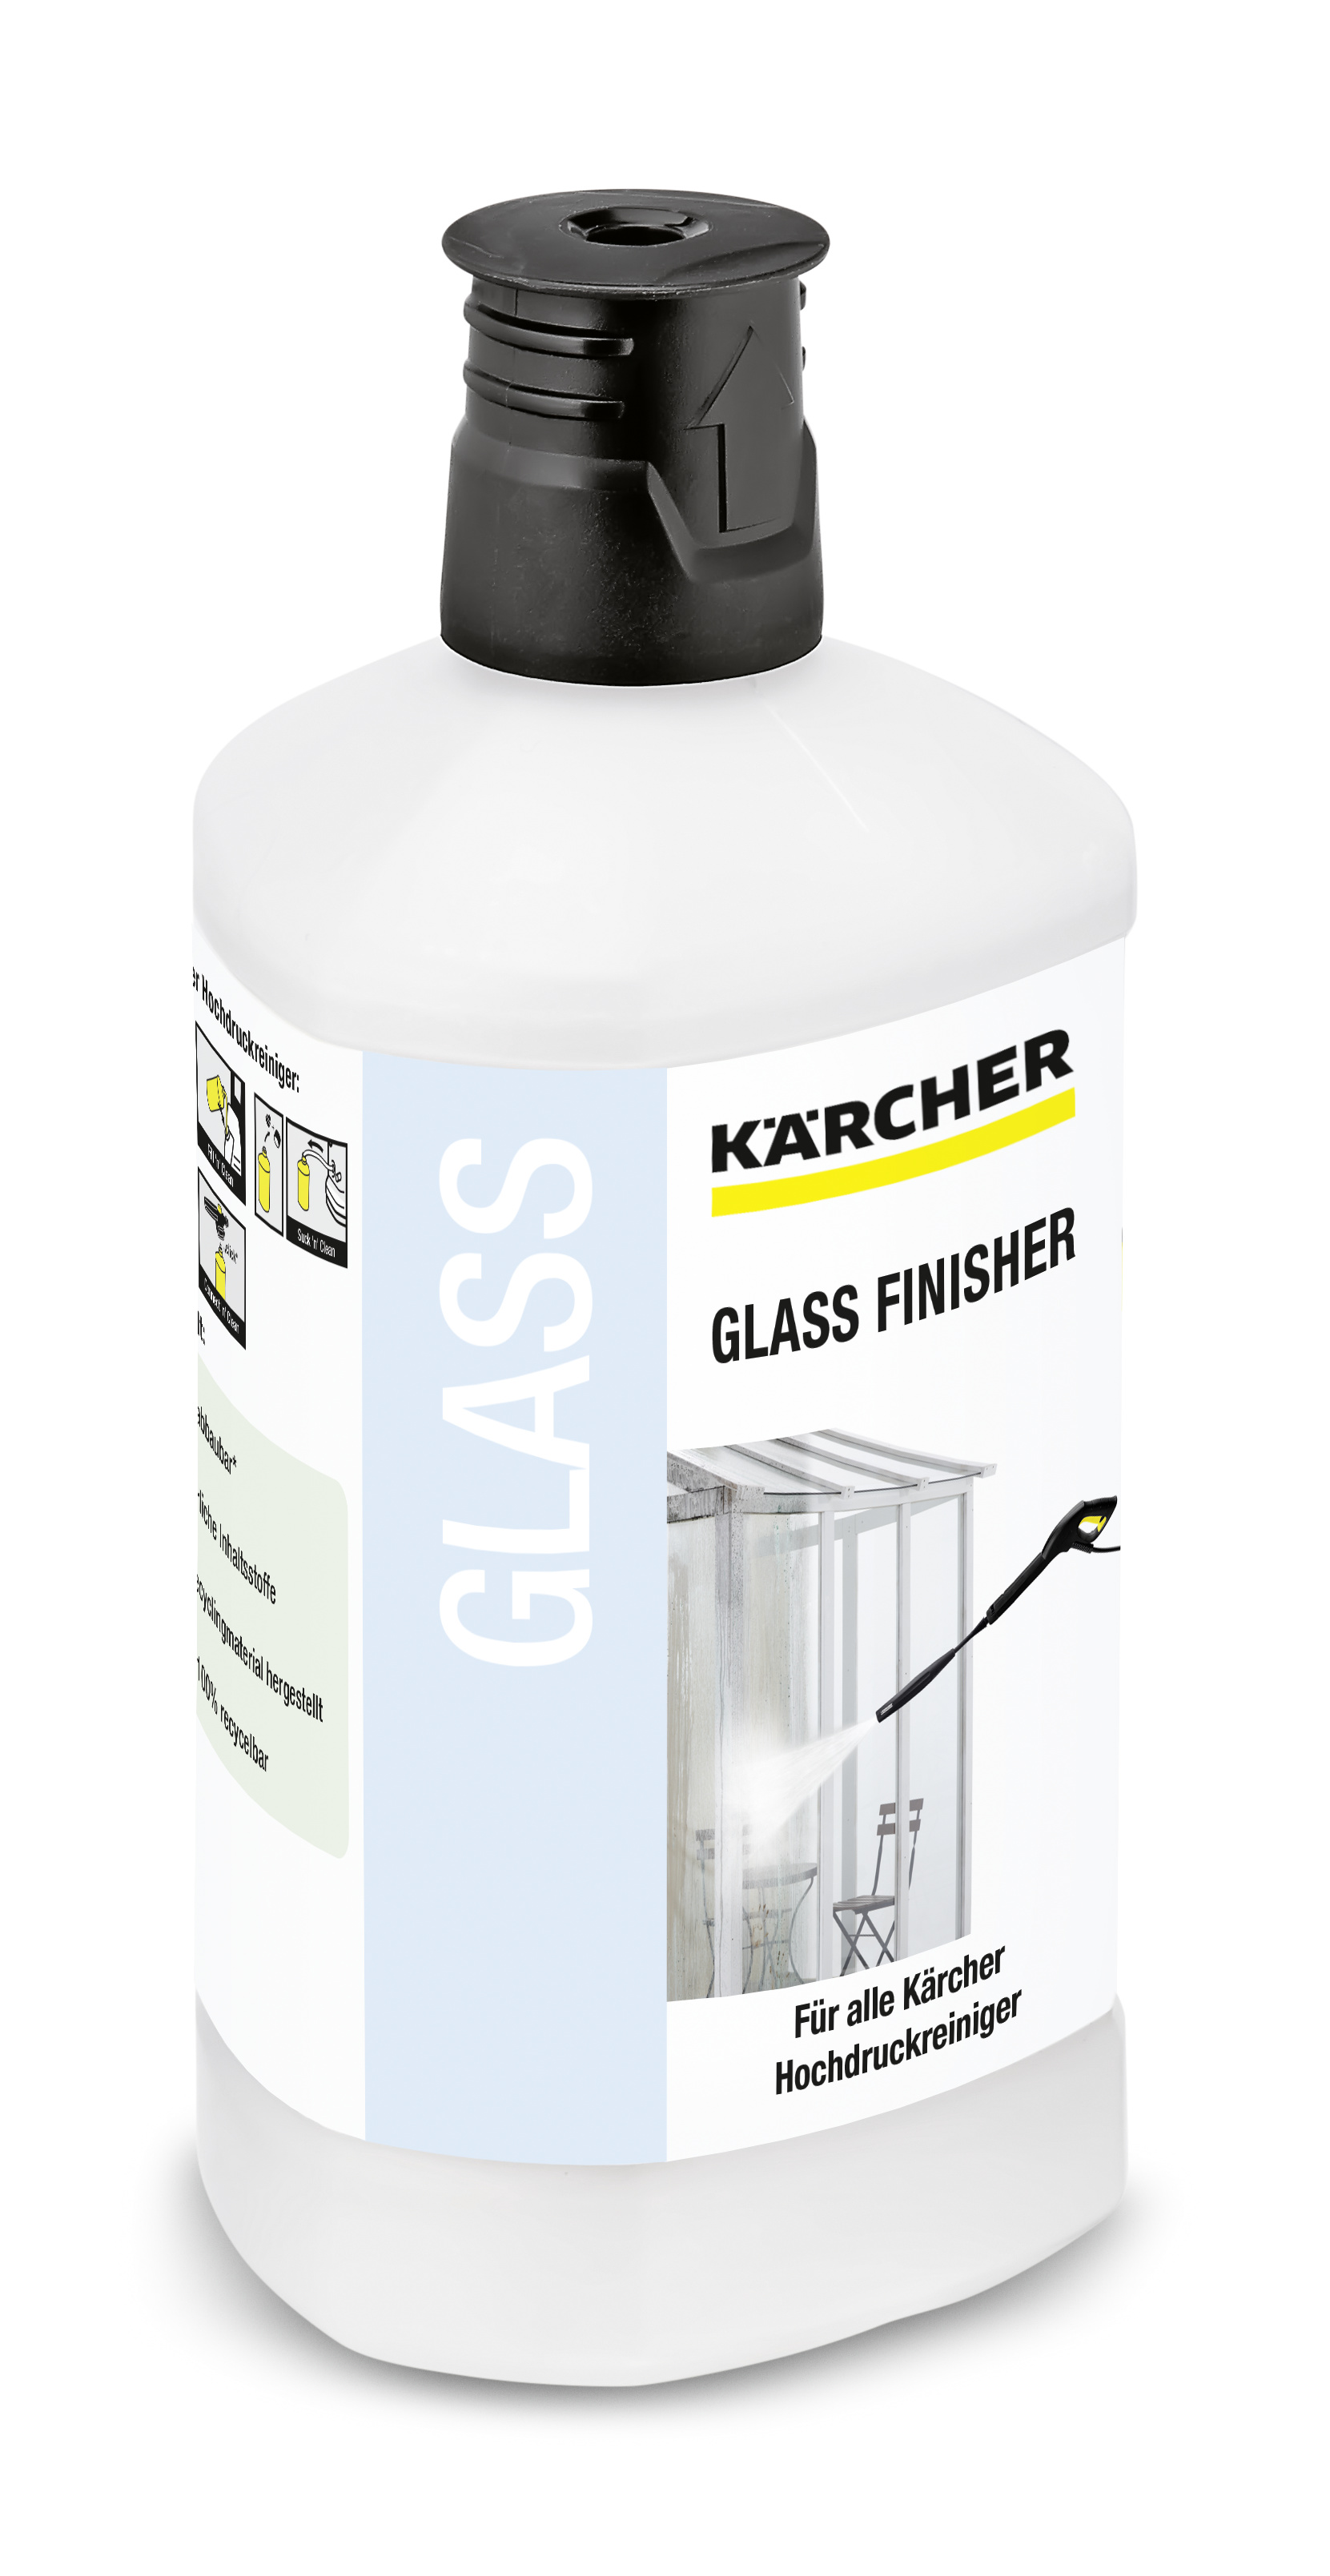 Glass finisher 3-in-1 RM 627, 1l Karcher